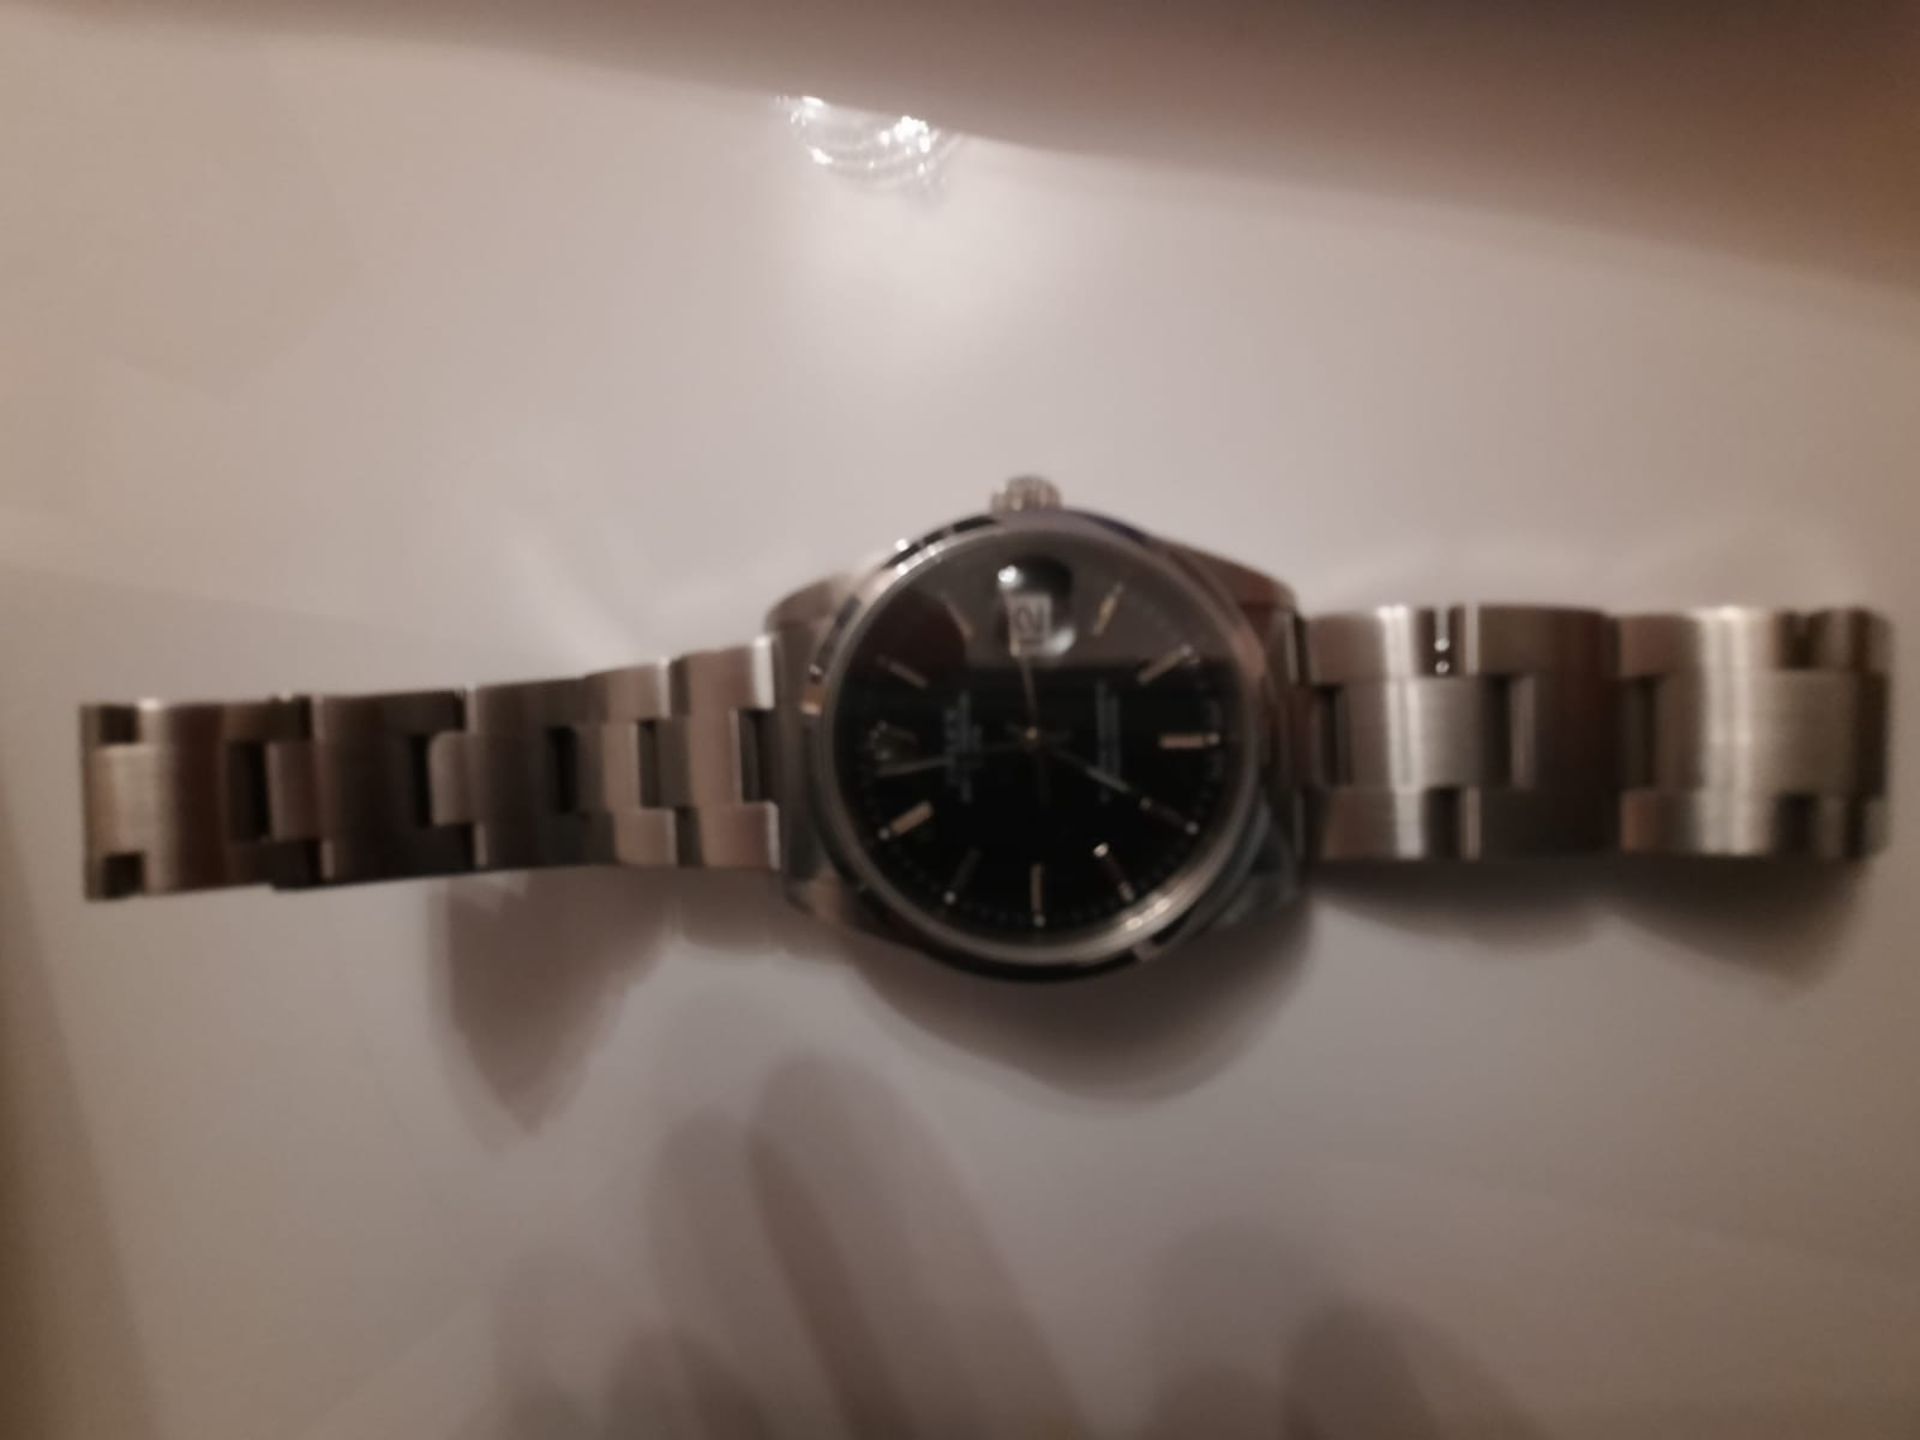 GENTS ROLEX OYSTER PERPETUAL DATE STAINLESS STEEL WRIST WATCH WITH BOX AND PAPERS - Image 3 of 12